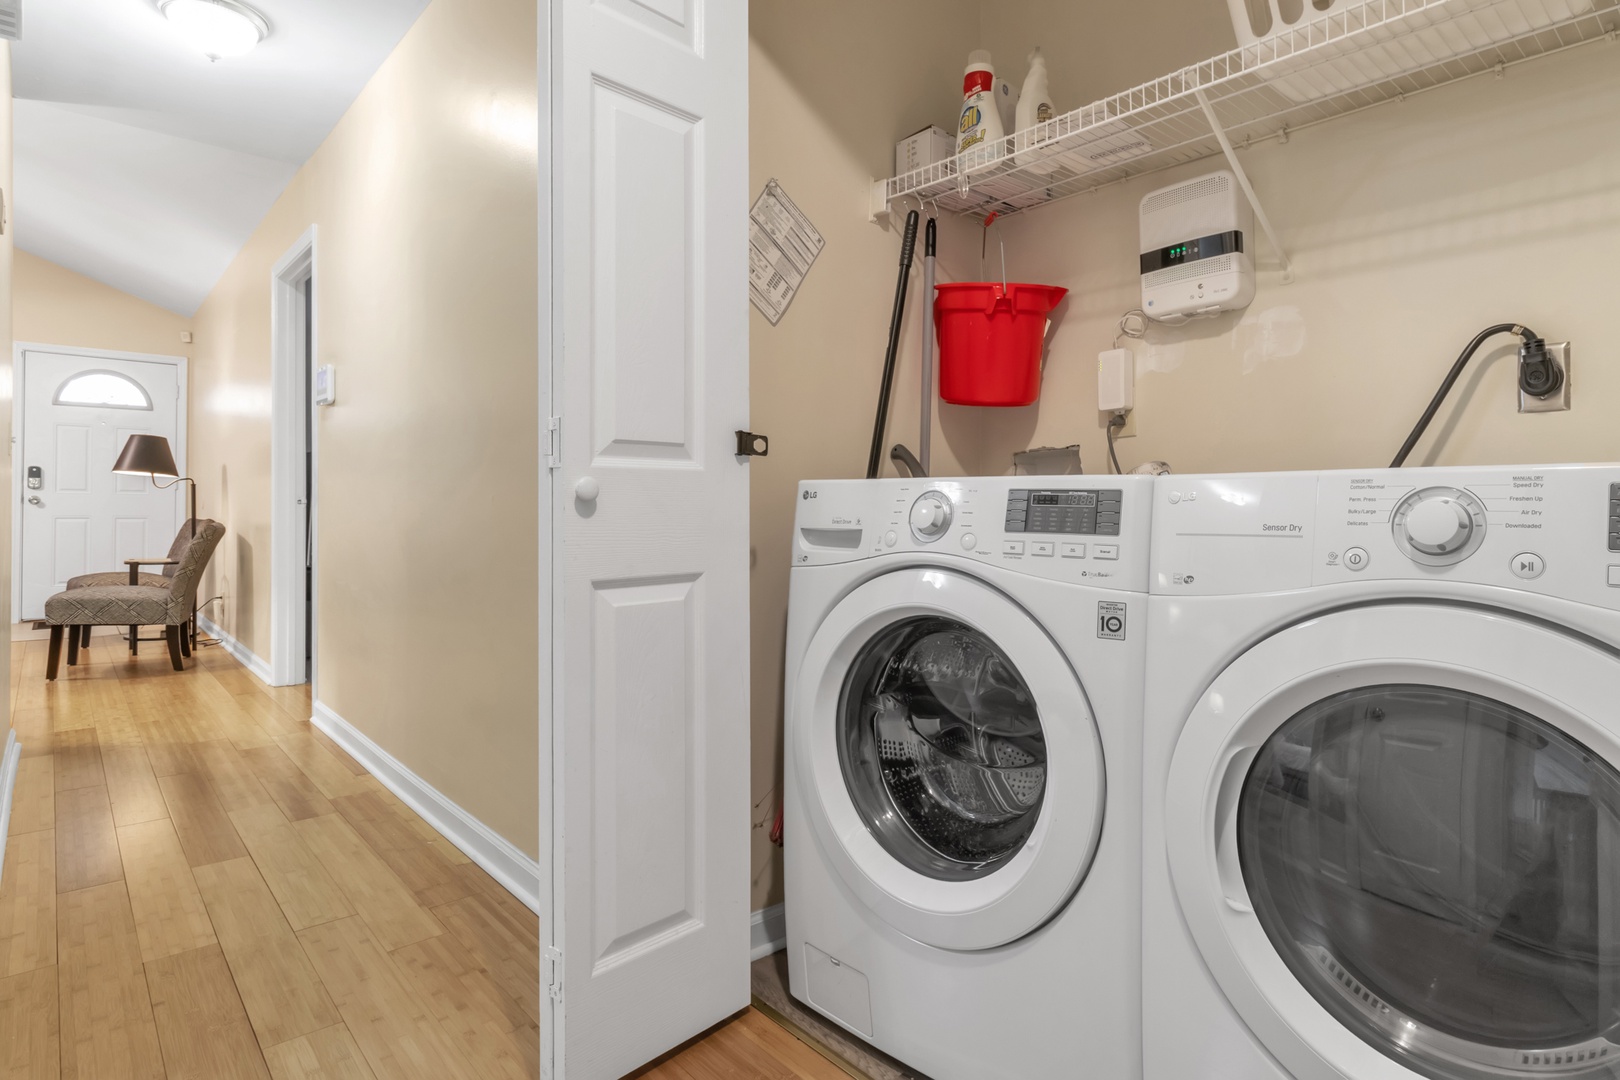 Private laundry is available for your stay, tucked away in a closet